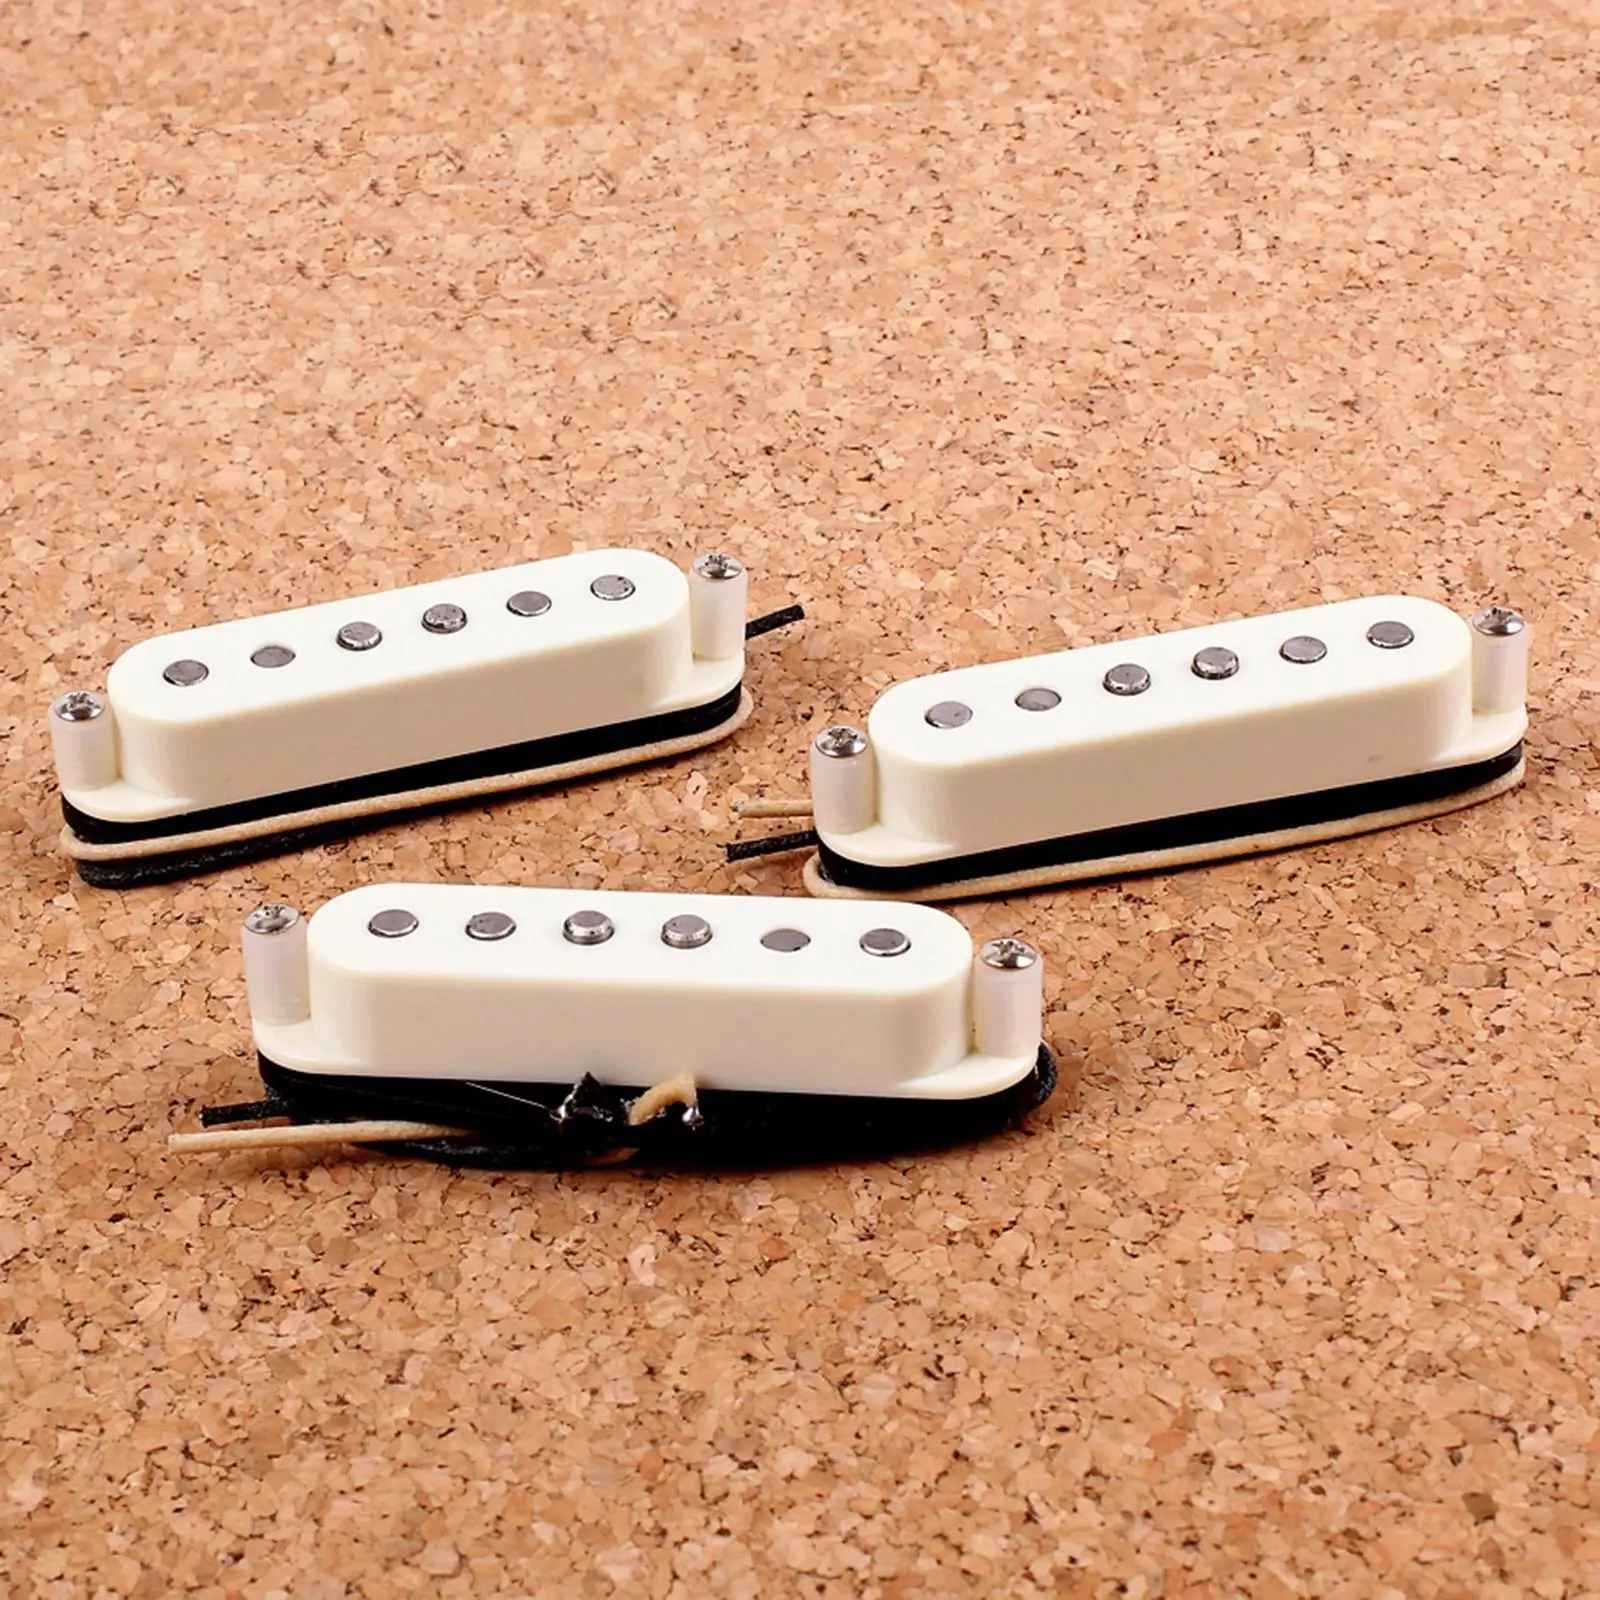 3 Pieces Silicone Guitar Pickup Set Guitar Replacement accessories including Neck Pickup, Middle and Bridge Pickup